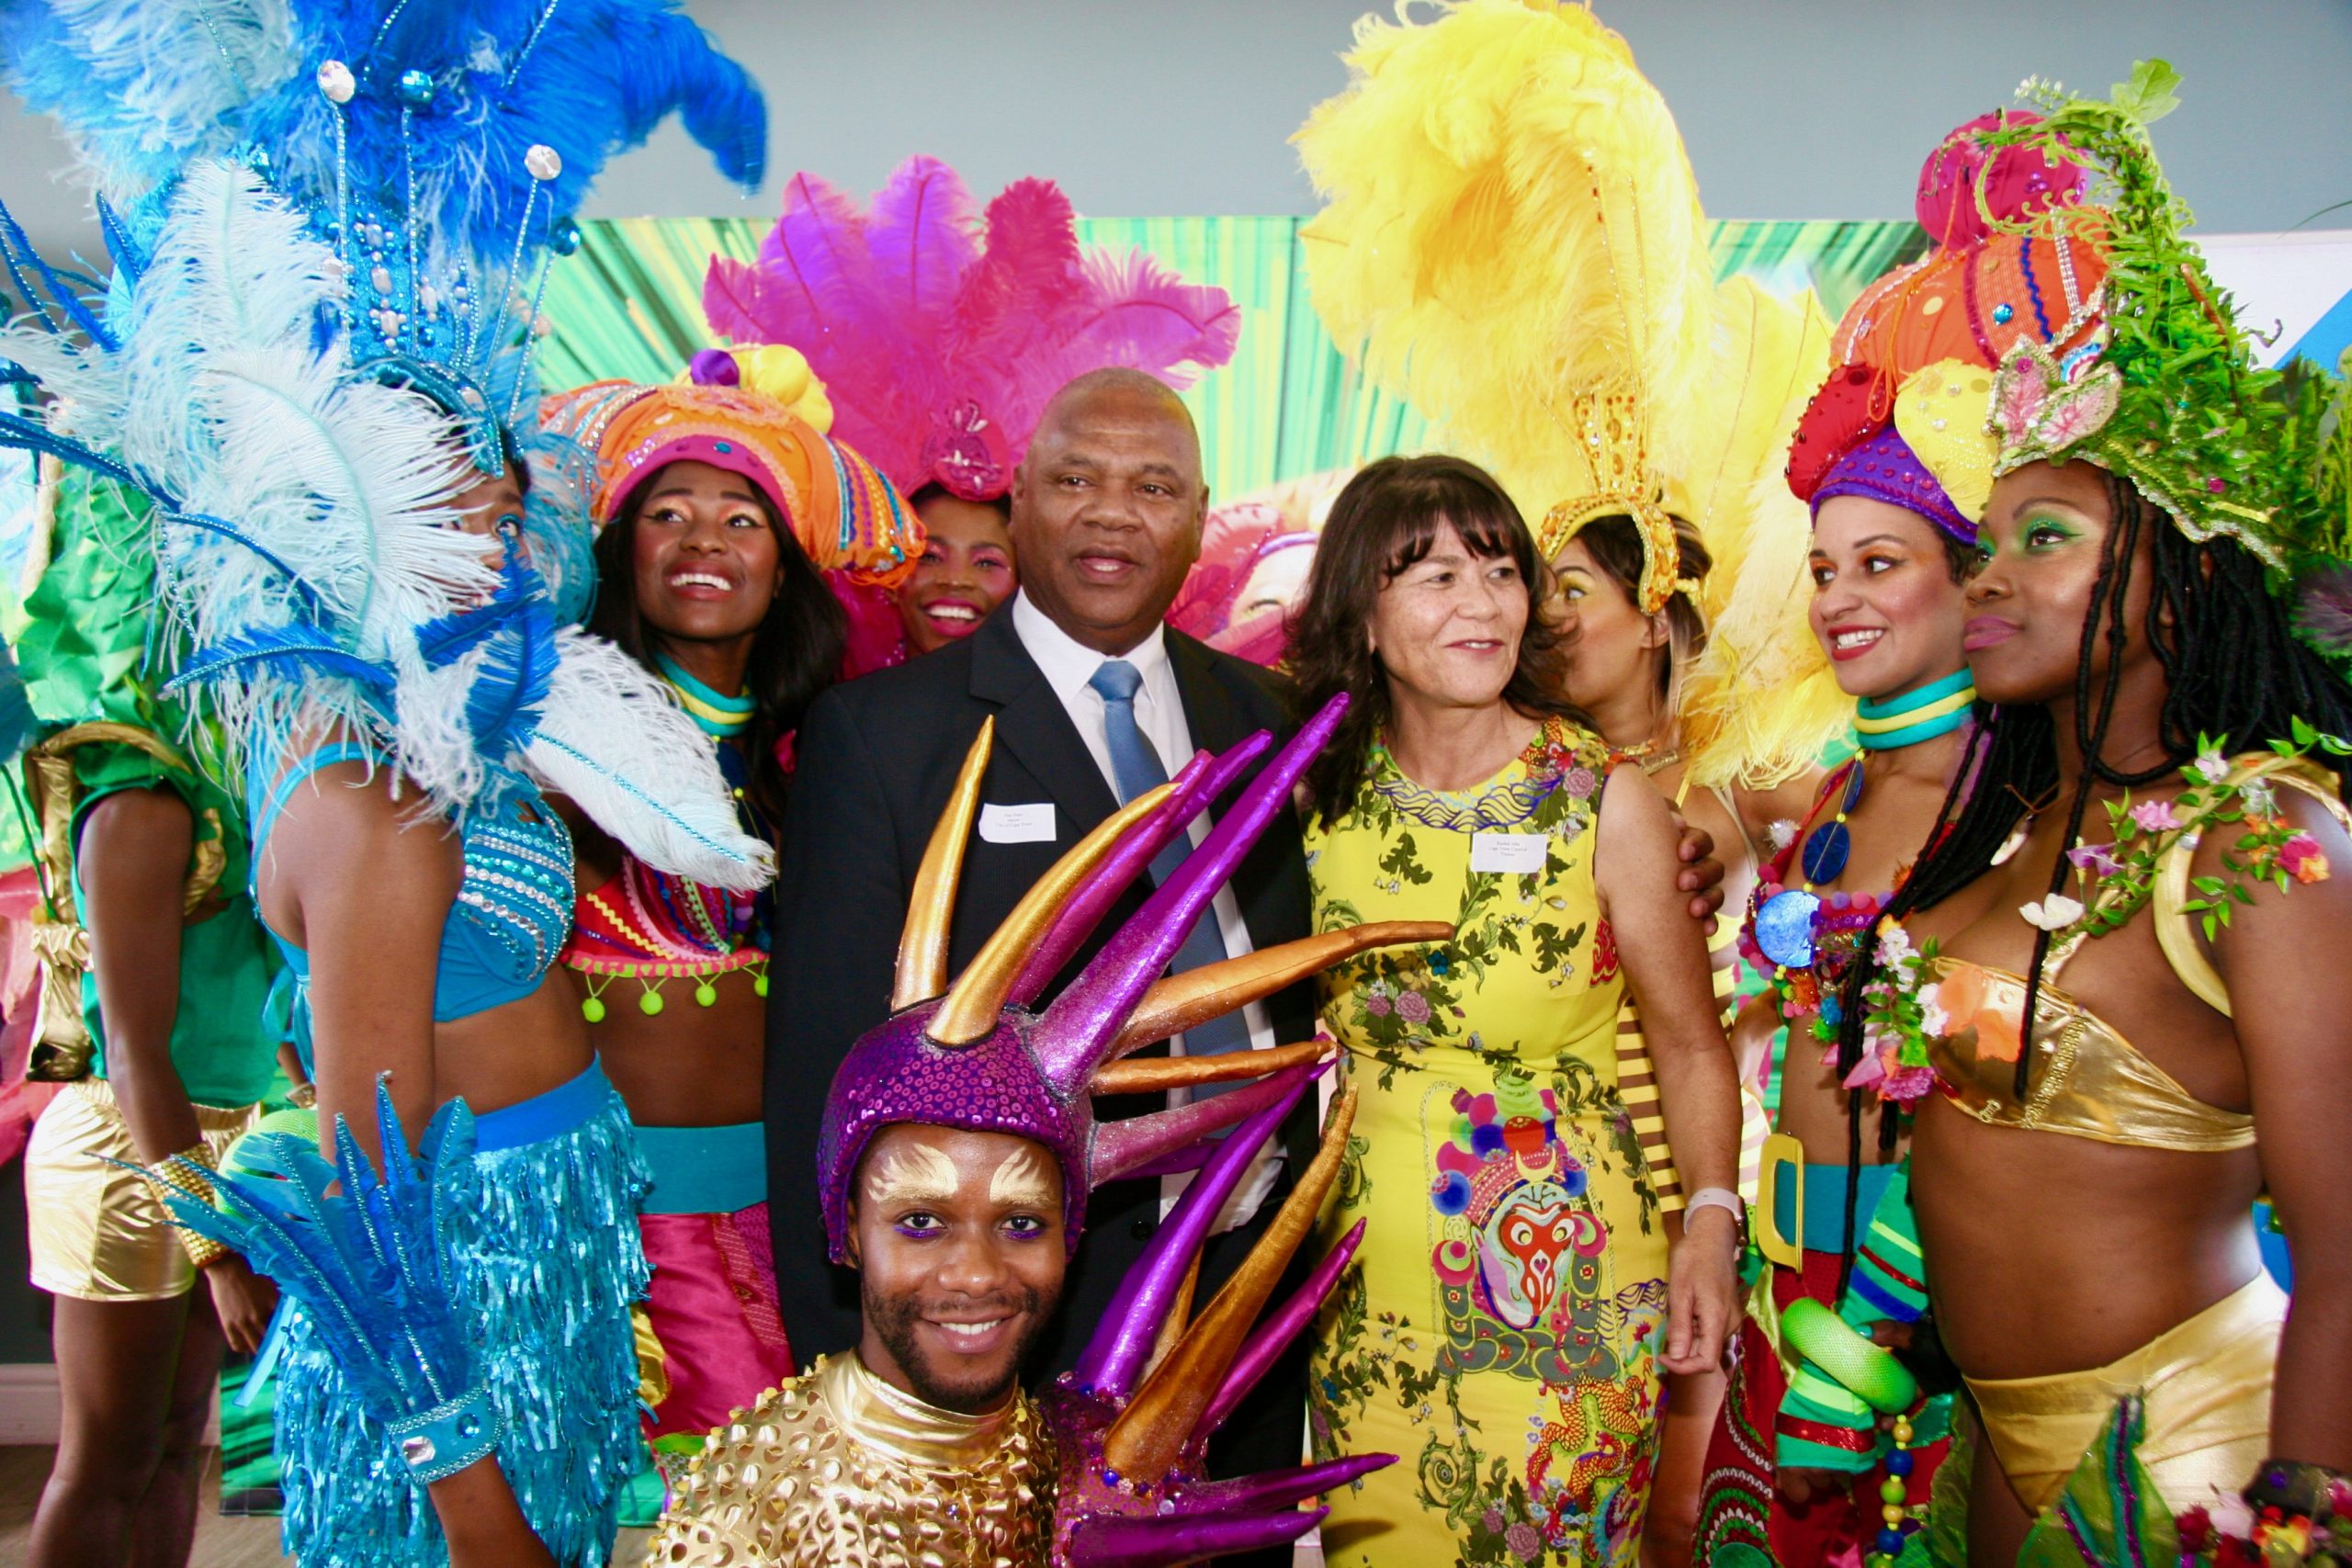 EXCITEMENT IS BUILDING FOR ANNUAL CAPE TOWN CARNIVAL IN MARCH